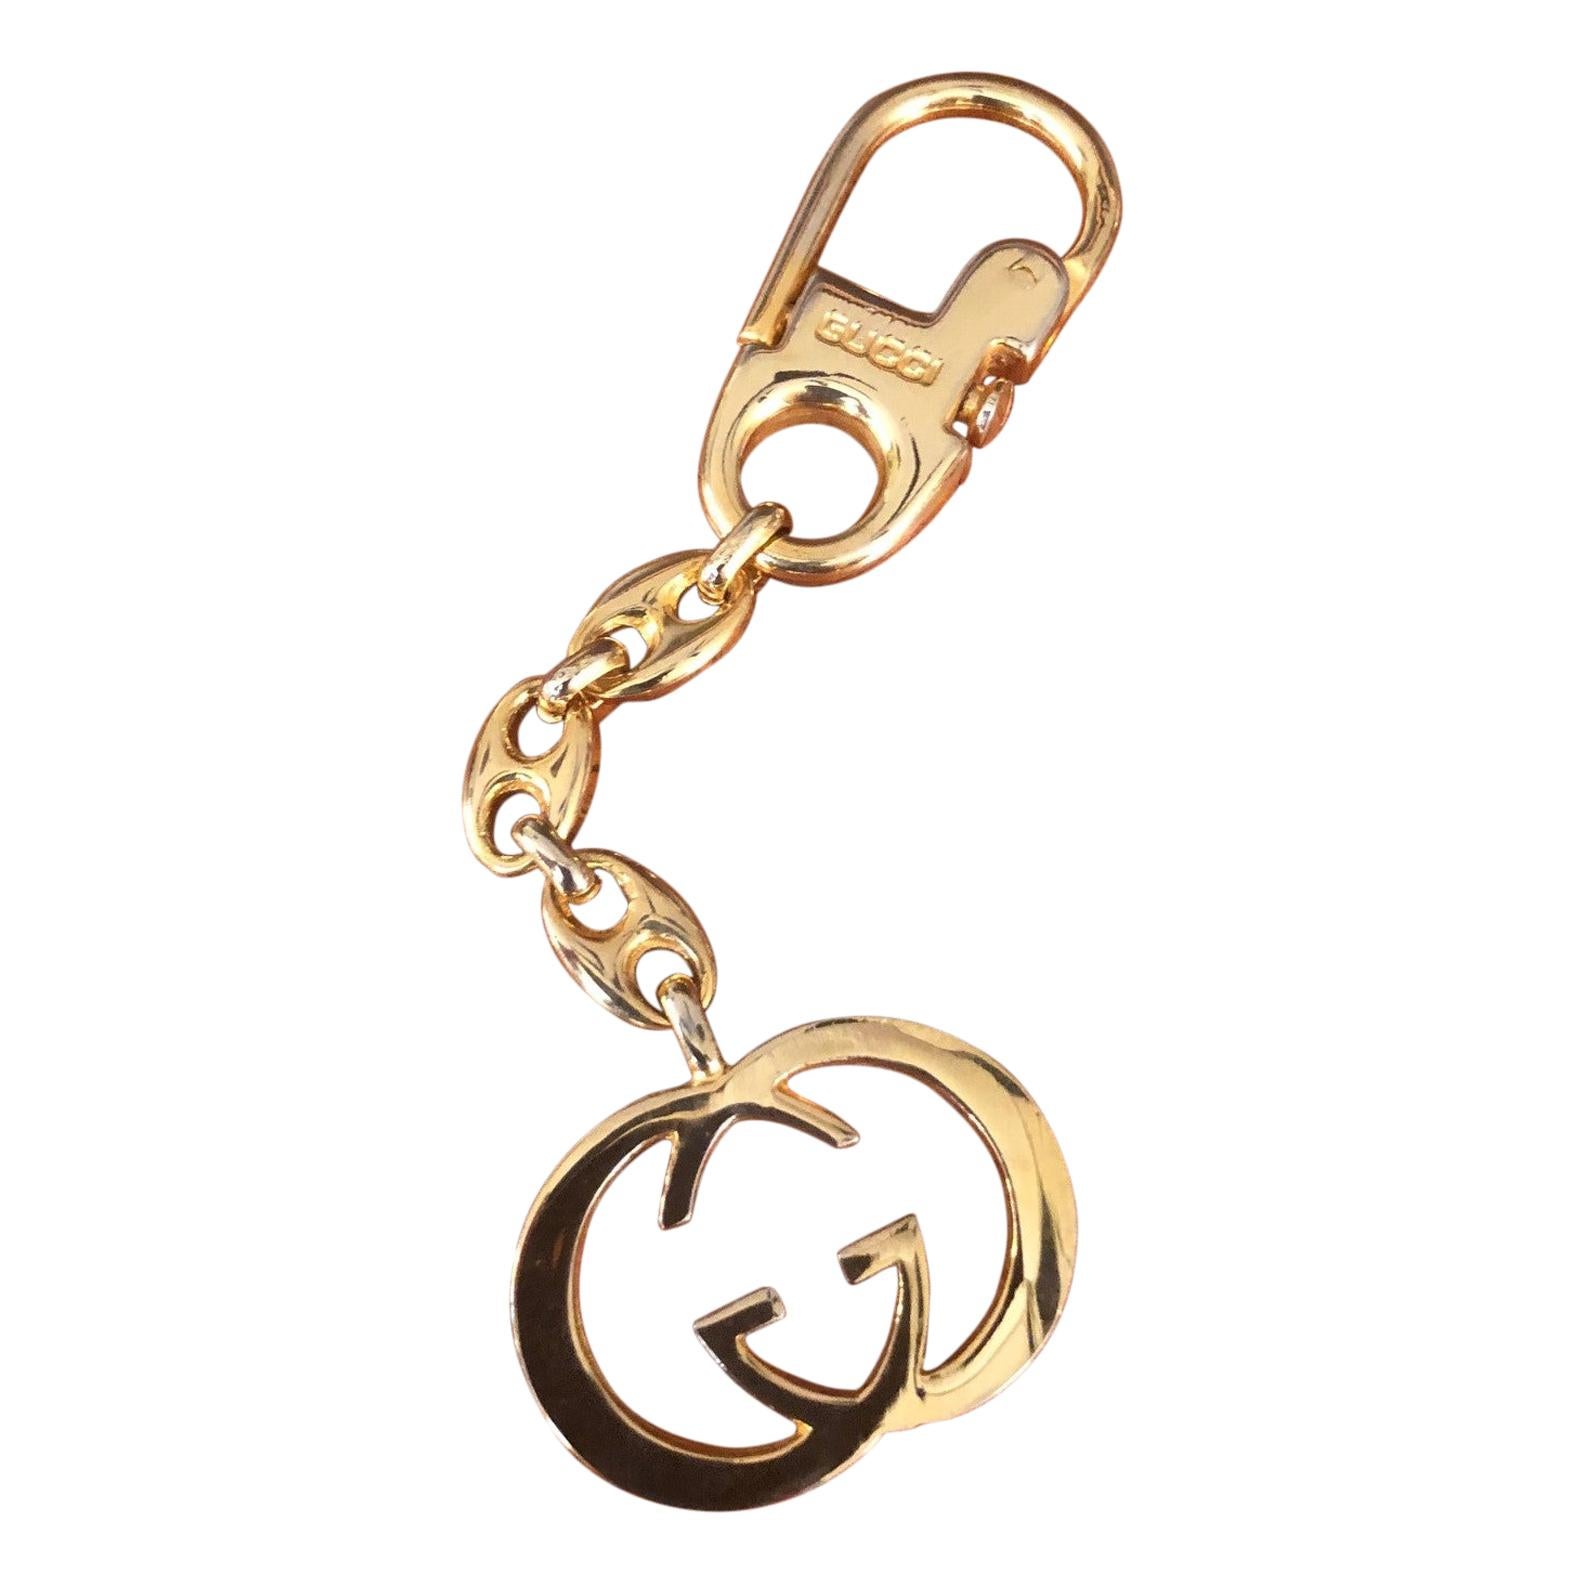 Vintage Gold-Plated Logo Keychain by Gucci